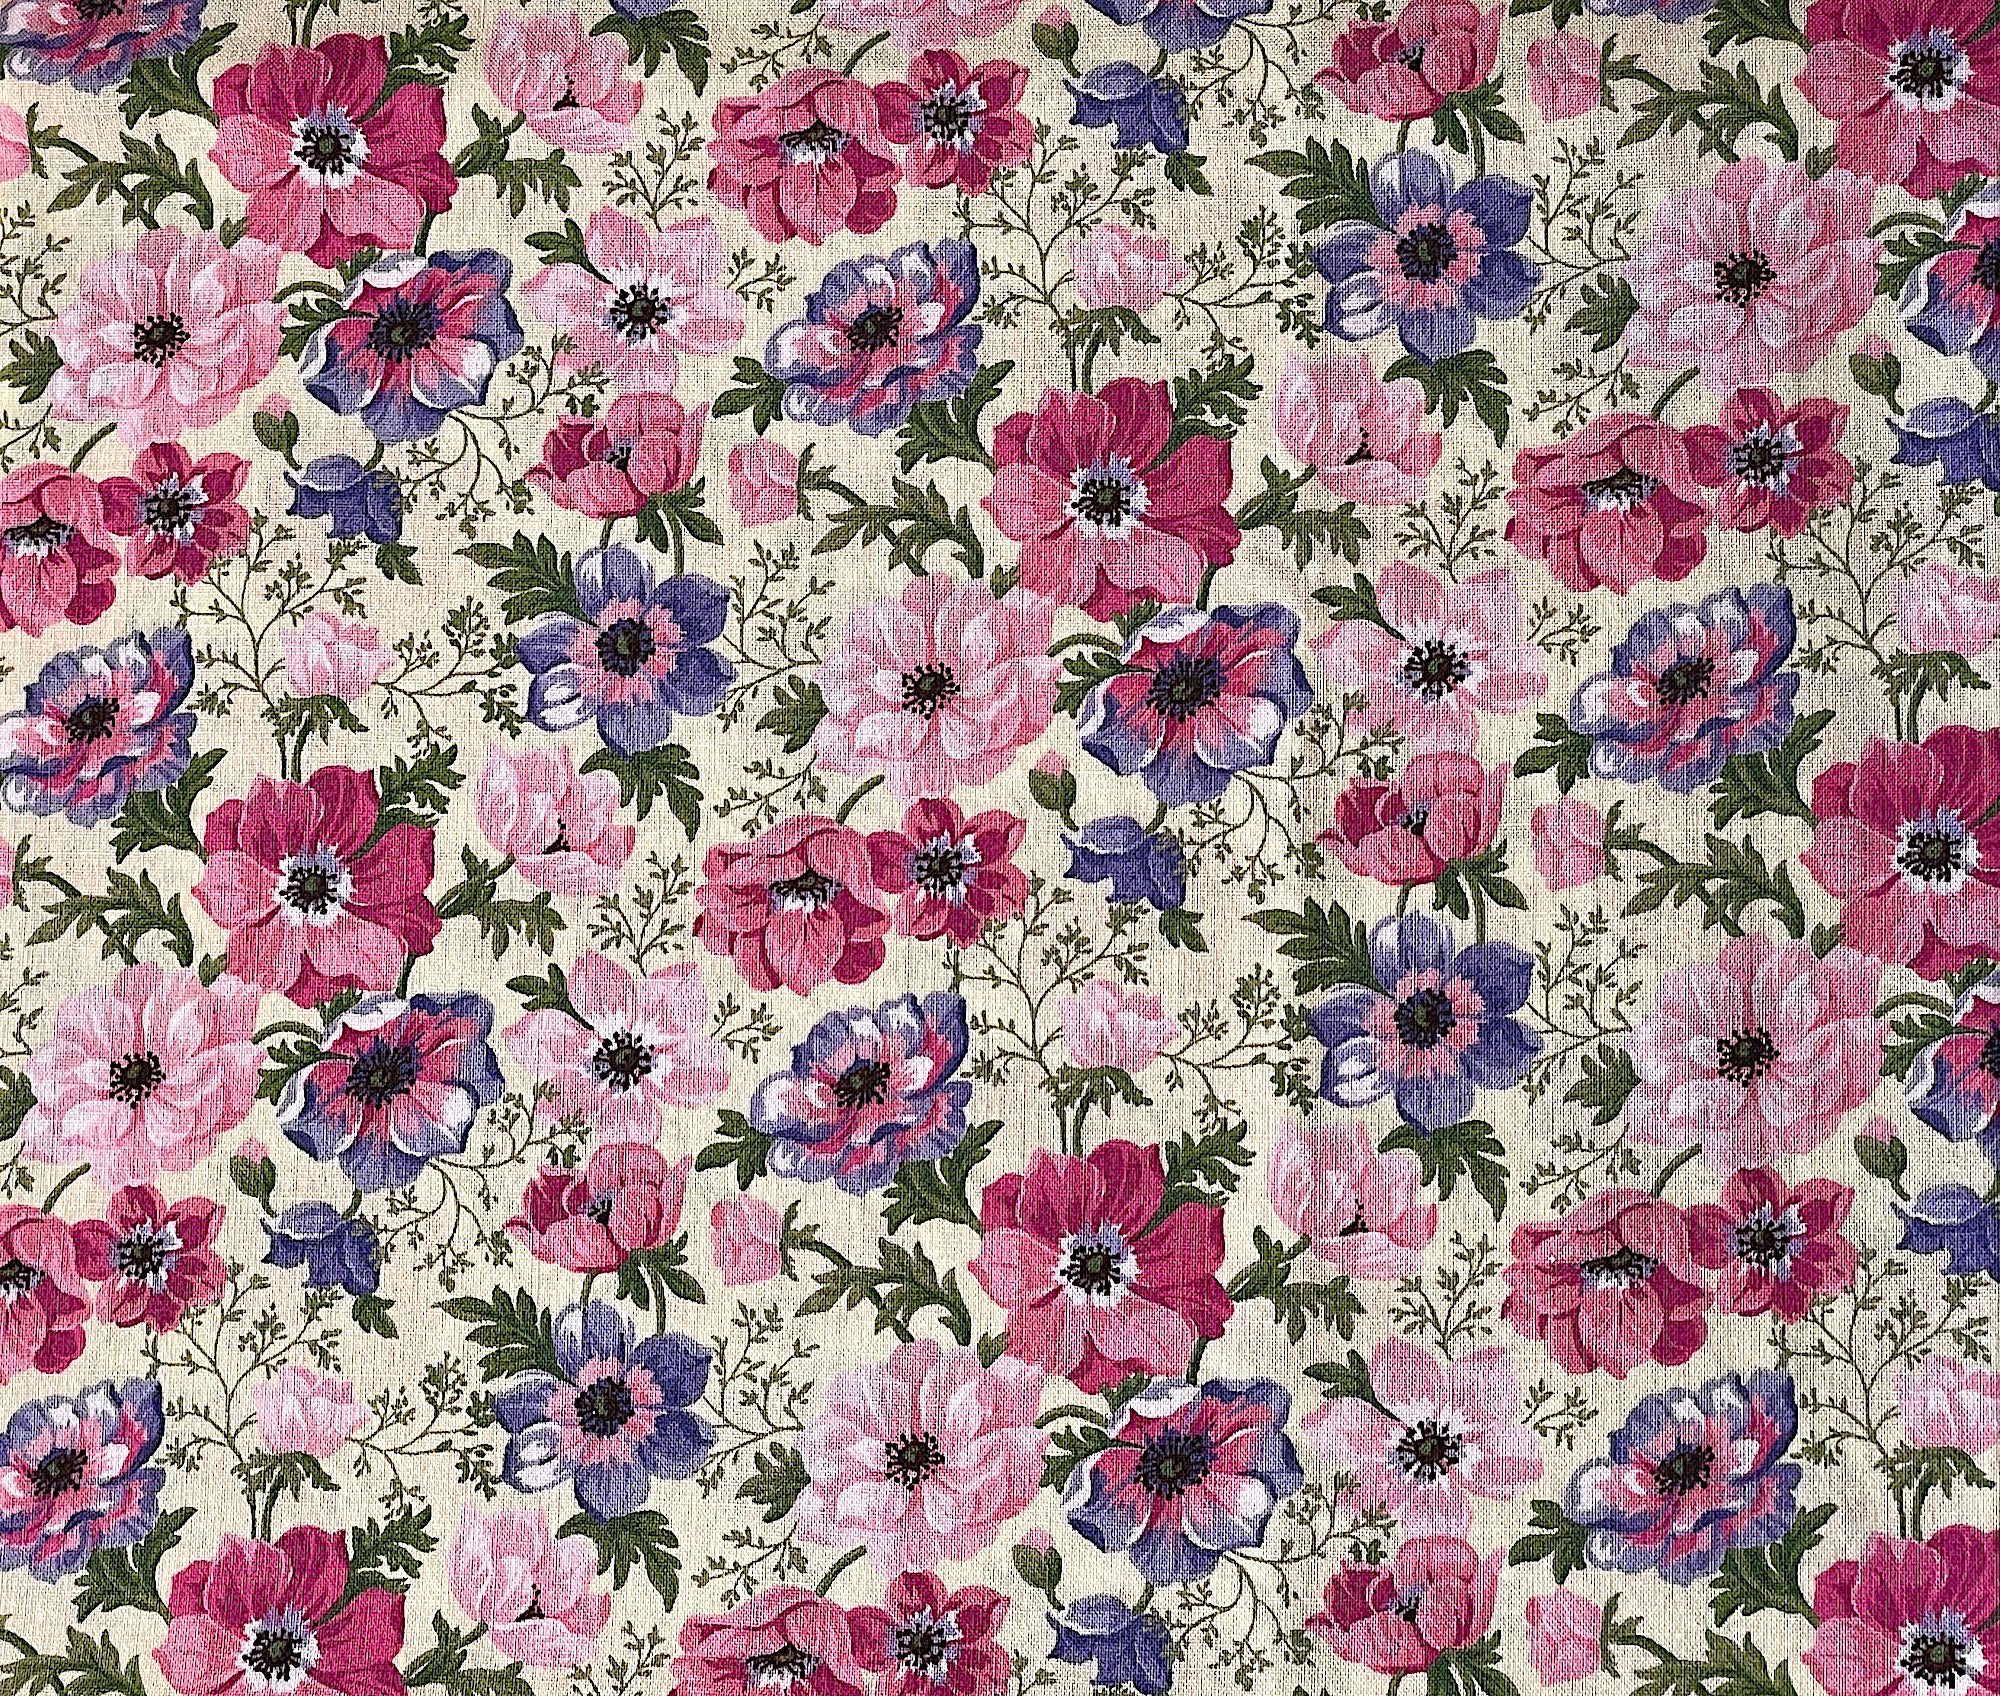 Purple and pink flowers on a cream background